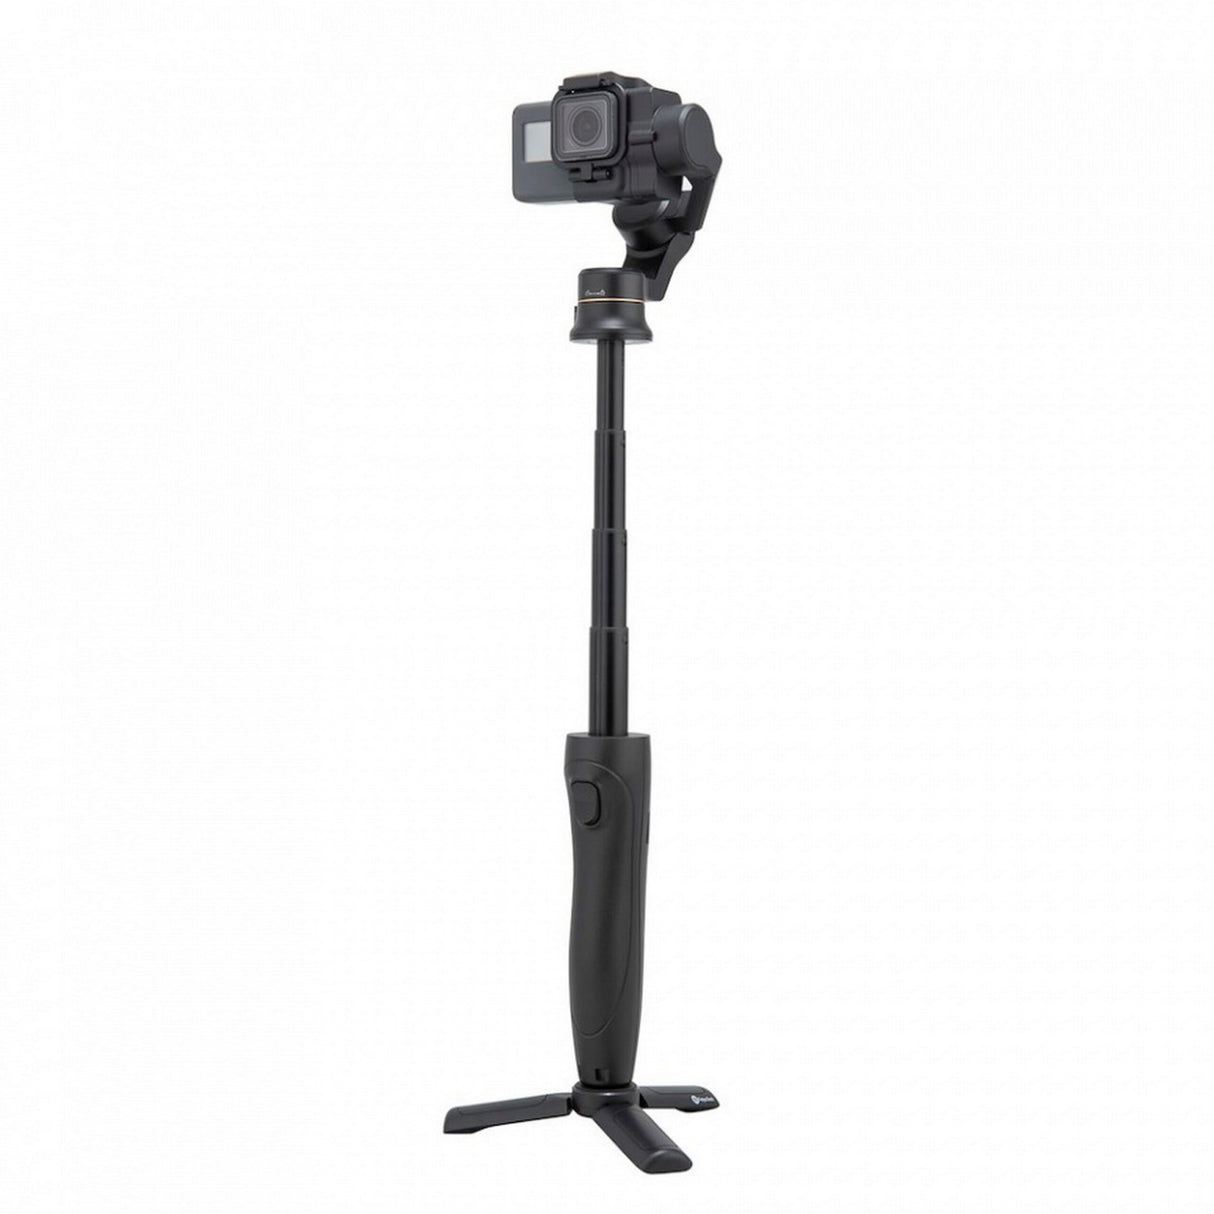 FeiyuTech FY VIMBLE2A 3-Axis Handheld Gimbal for Action Camera